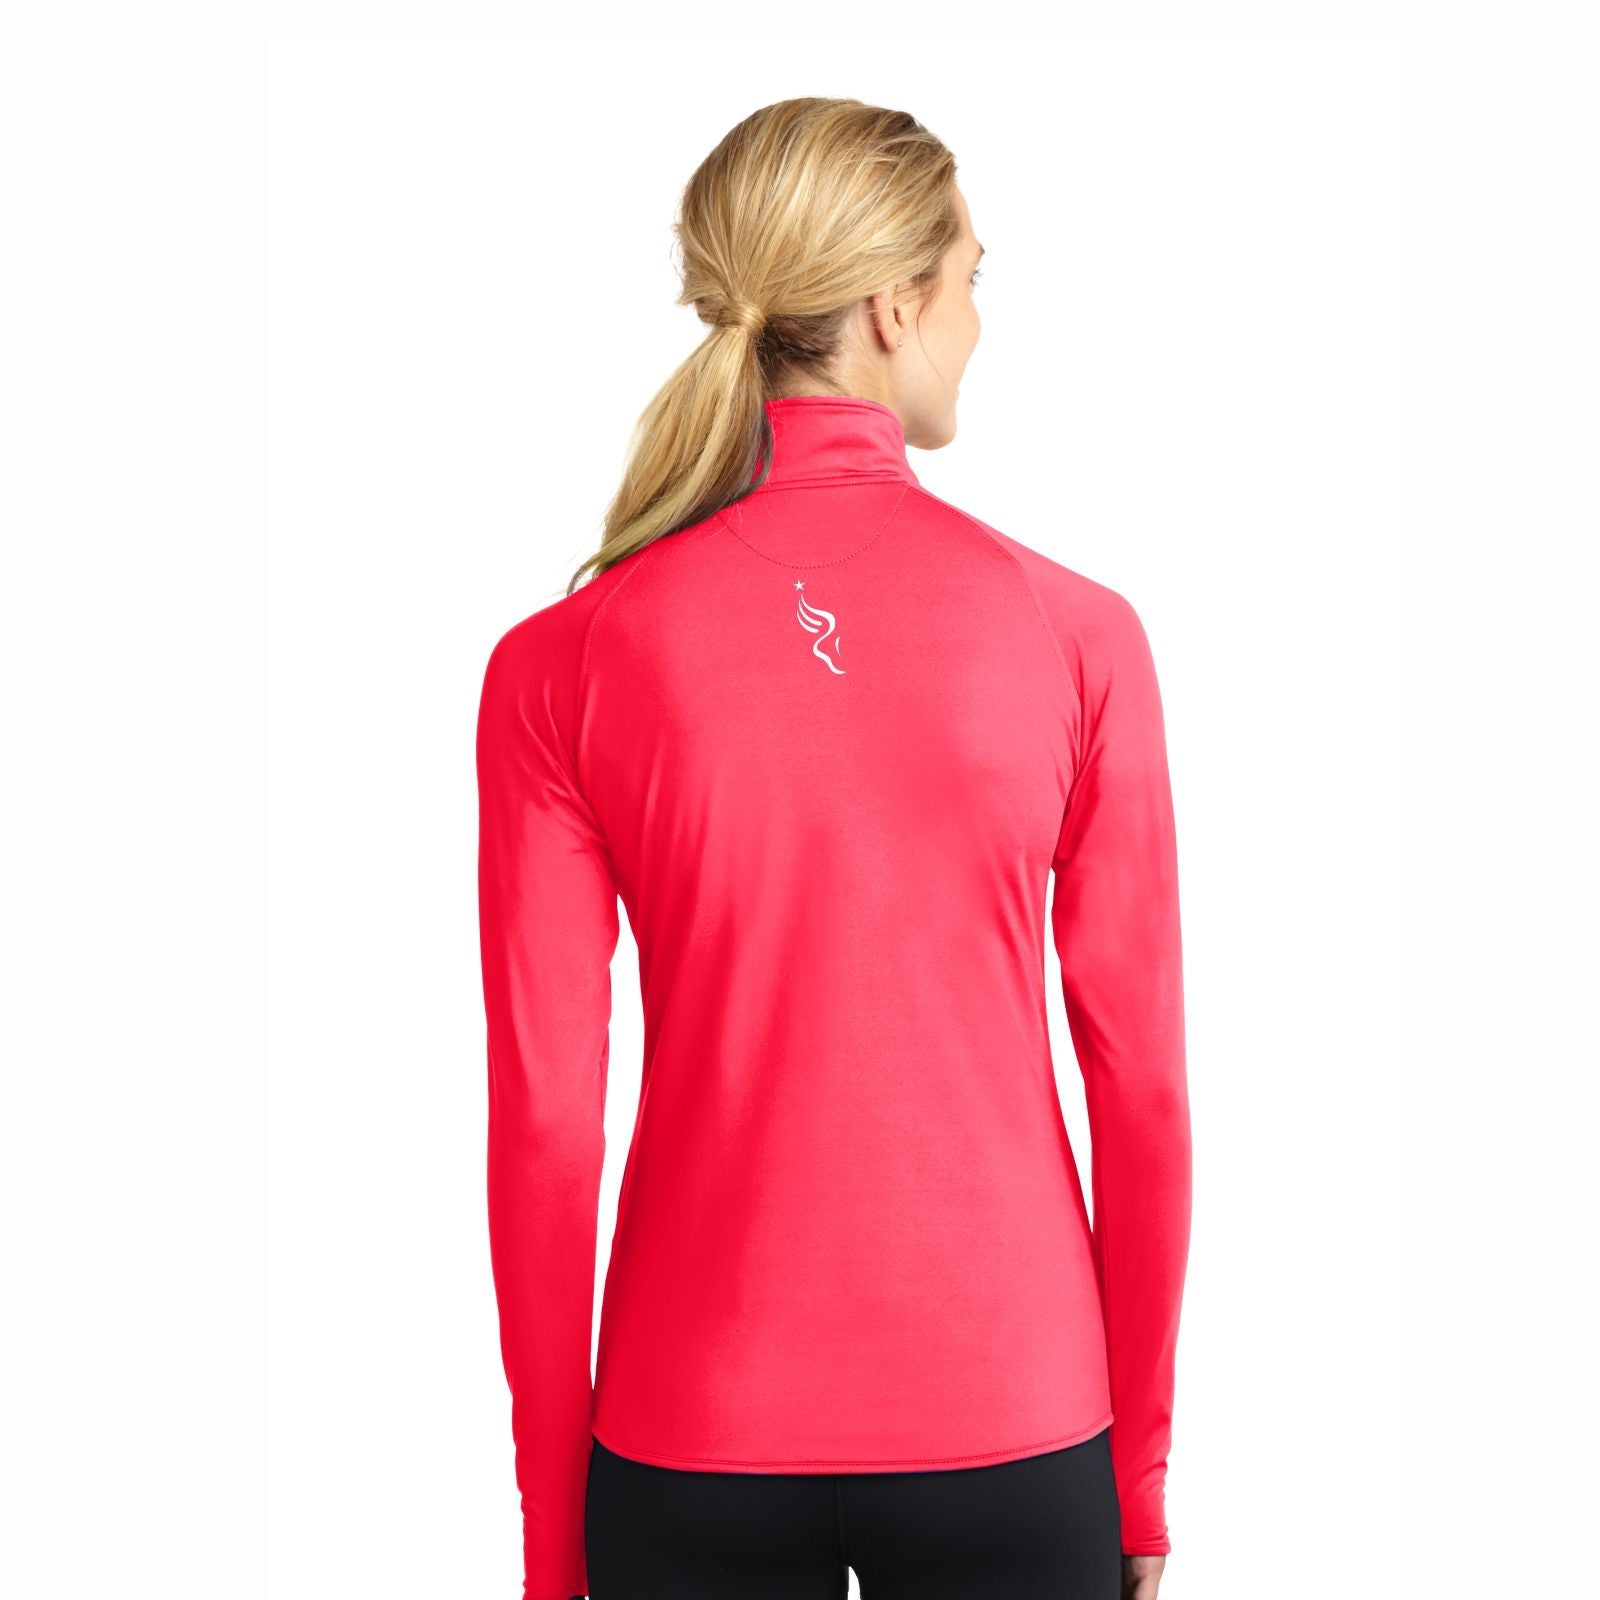 Women's Tech Pocket 1/2 Zip -Hot Coral- D&W 13.1 Embroidery